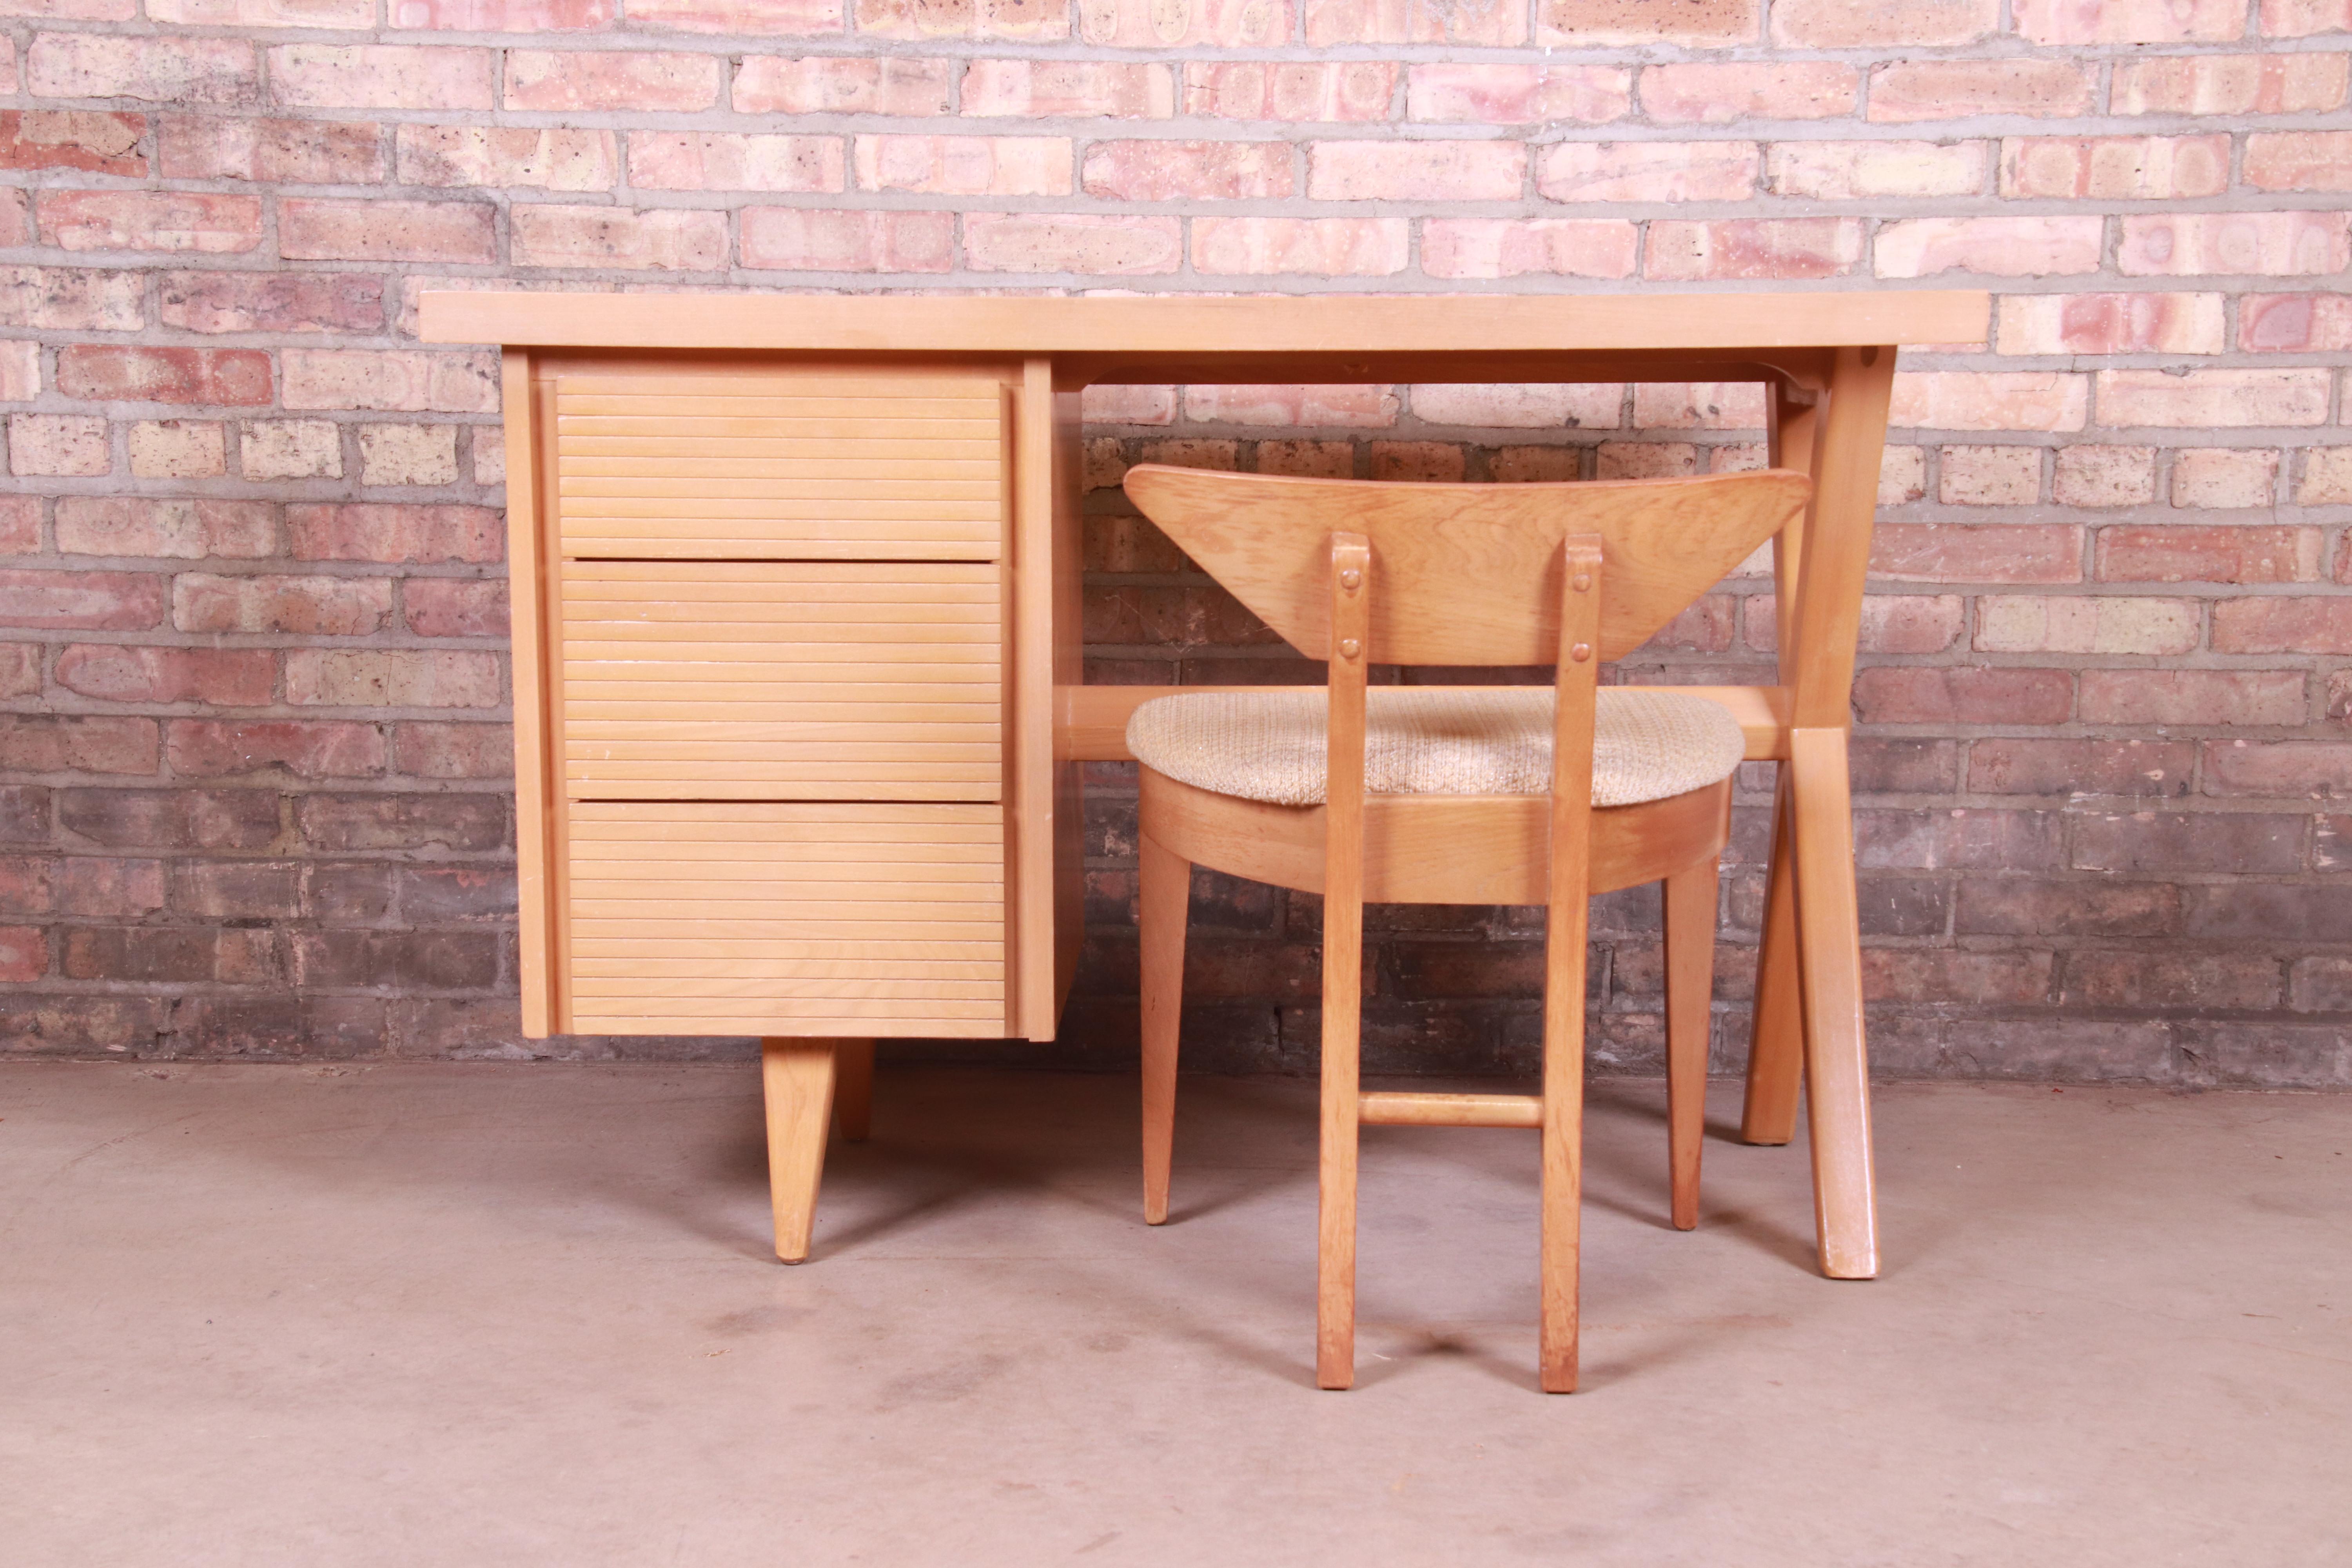 A gorgeous Minimalist Mid-Century Modern vanity or writing desk and chair

In the style of Paul McCobb

By Robinson Furniture Company

USA, 1950s

Blonde maple desk and chair, with upholstered seat.

Measures:
Desk 45